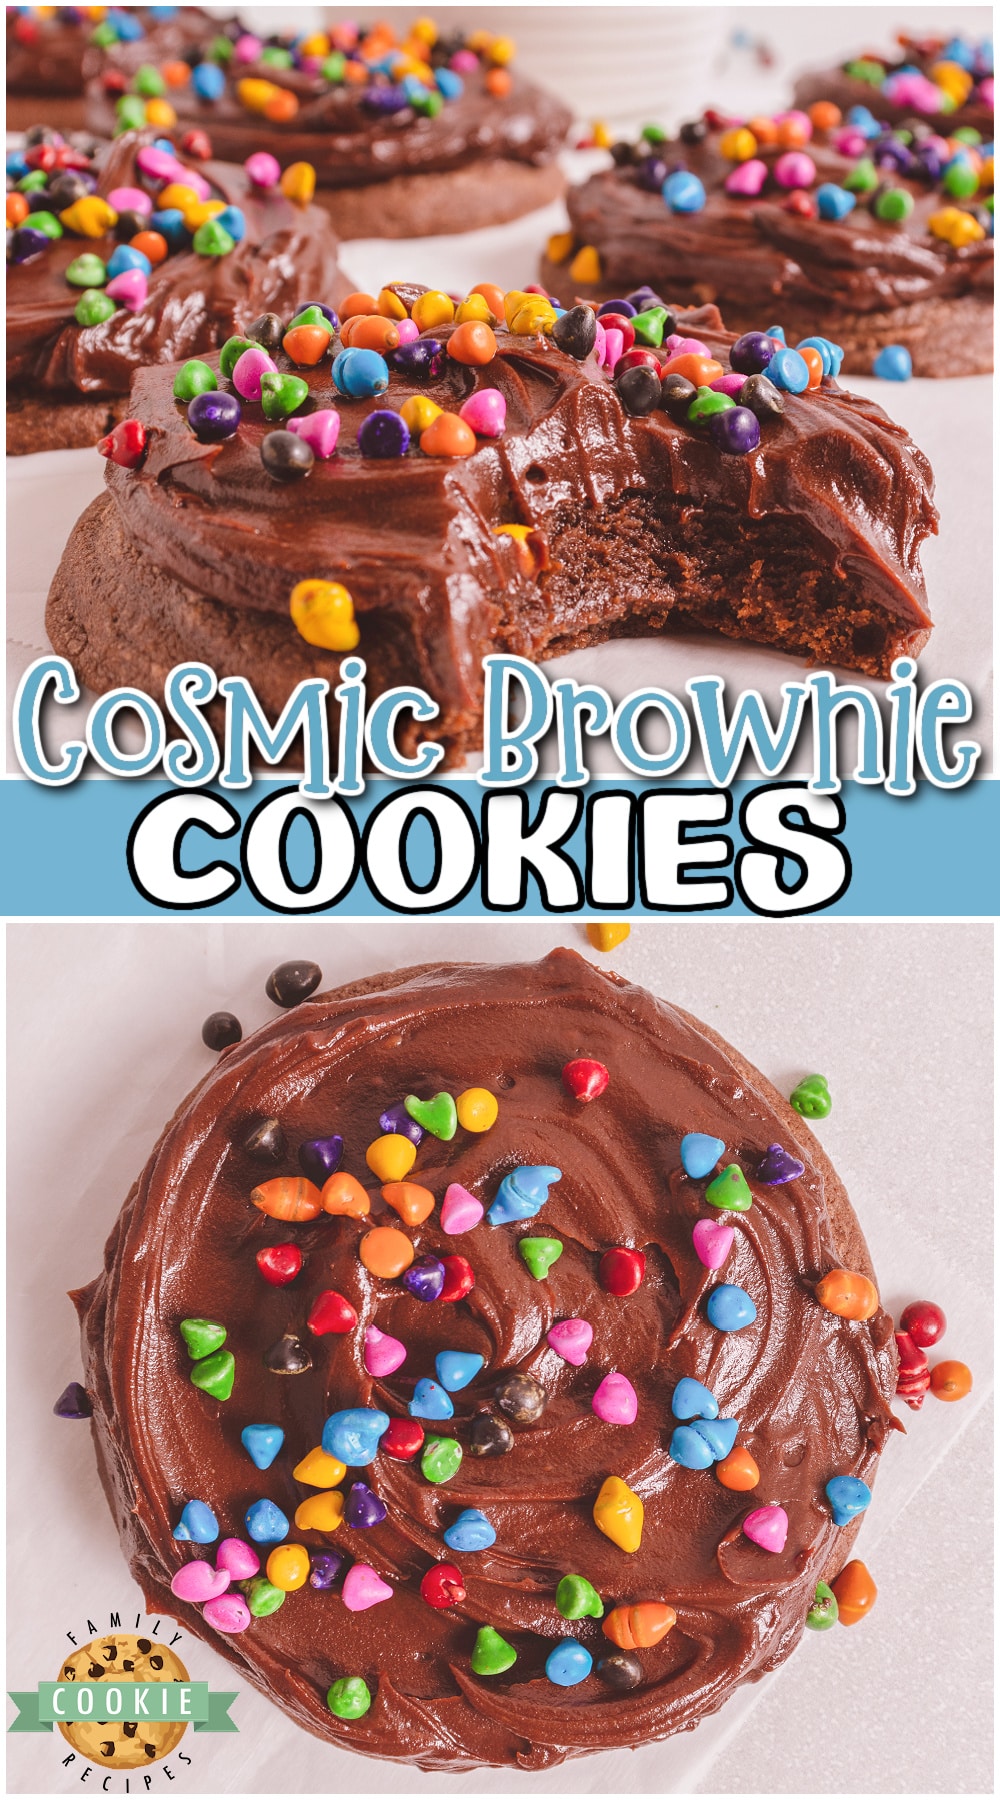 Cosmic Brownie Cookies are fudgy cookies covered in chocolate ganache & topped with fun rainbow sprinkles! Cookies perfect for Cosmic Brownie lovers! 